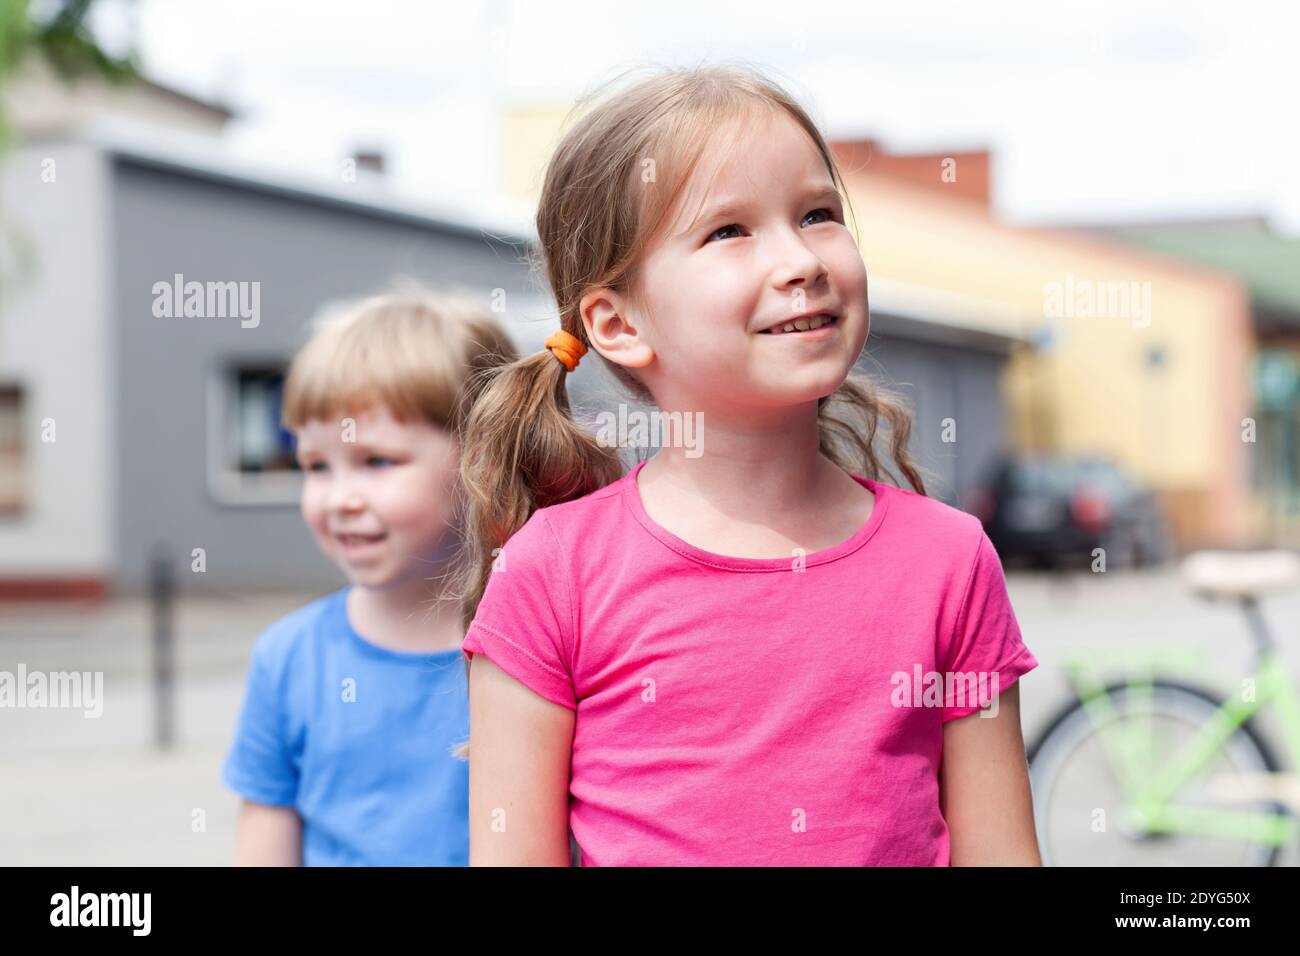 Happy, cheerful little school age girl with twin tails smiling, two sisters on the street together, one girl looking up at the parent, siblings Stock Photo